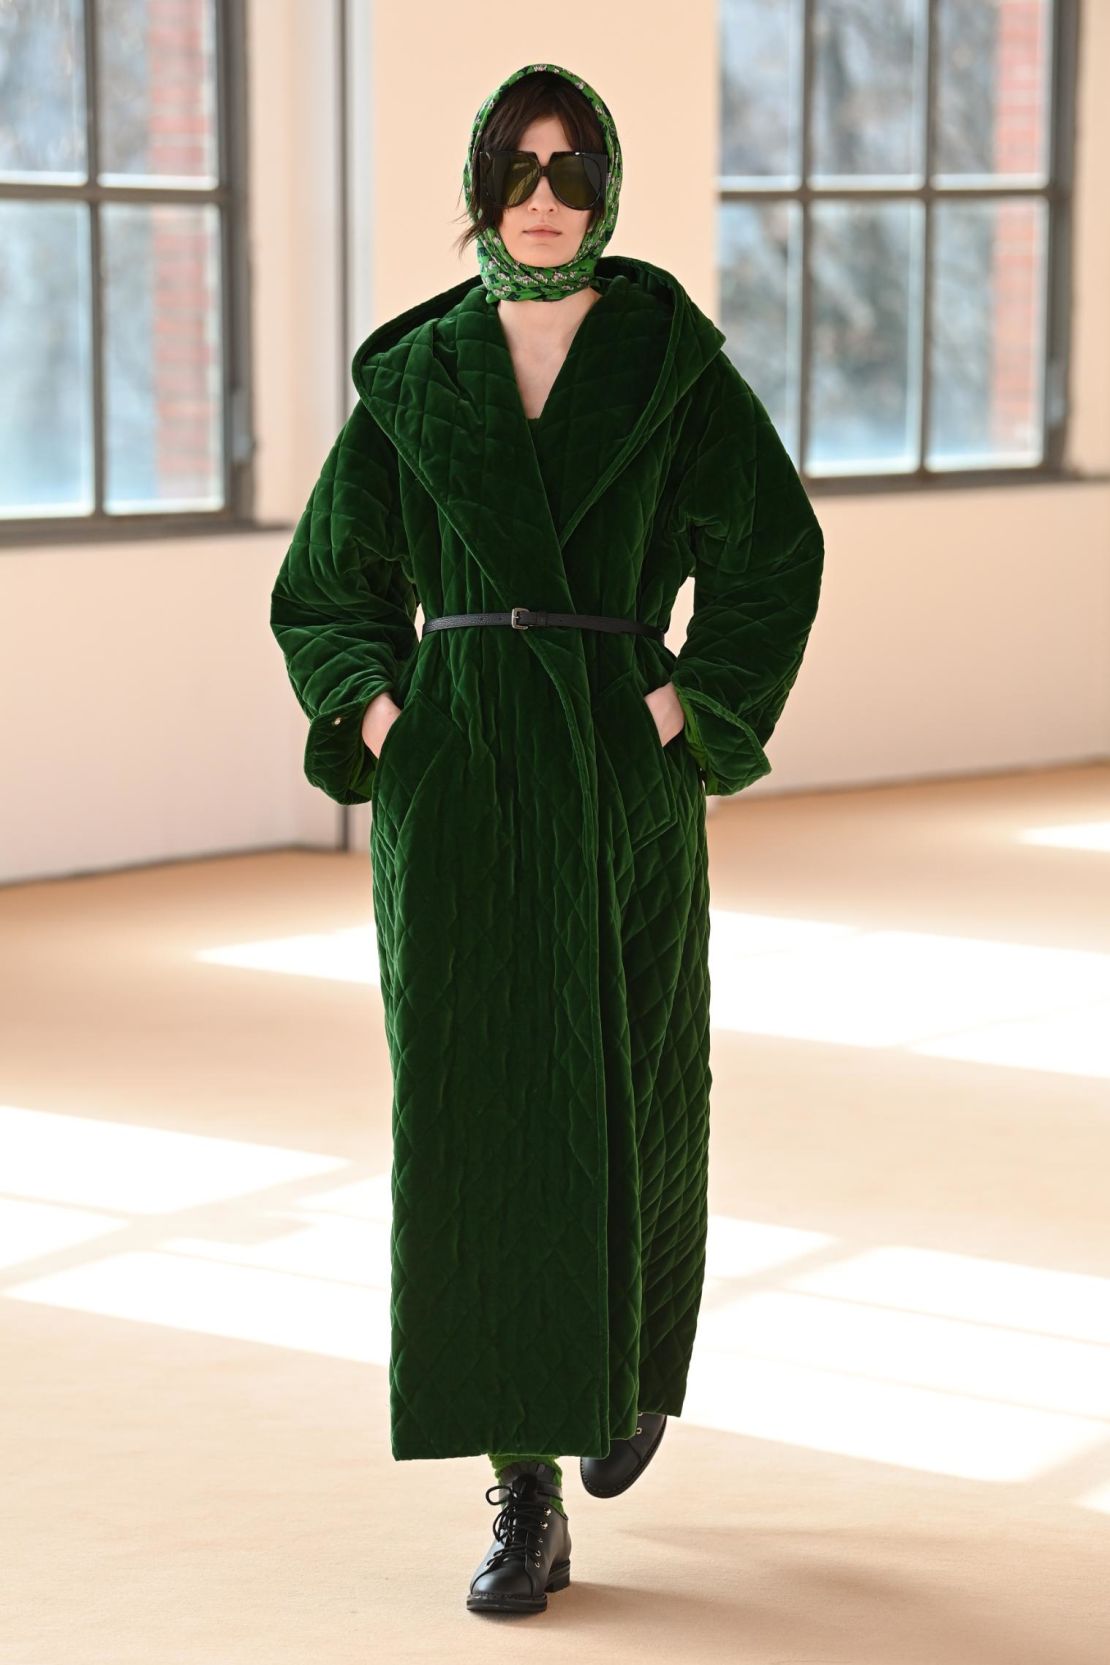 Britannic style with an Italian accent, Max Mara's AW21 collection is for the "self-made queens," writes the show notes.